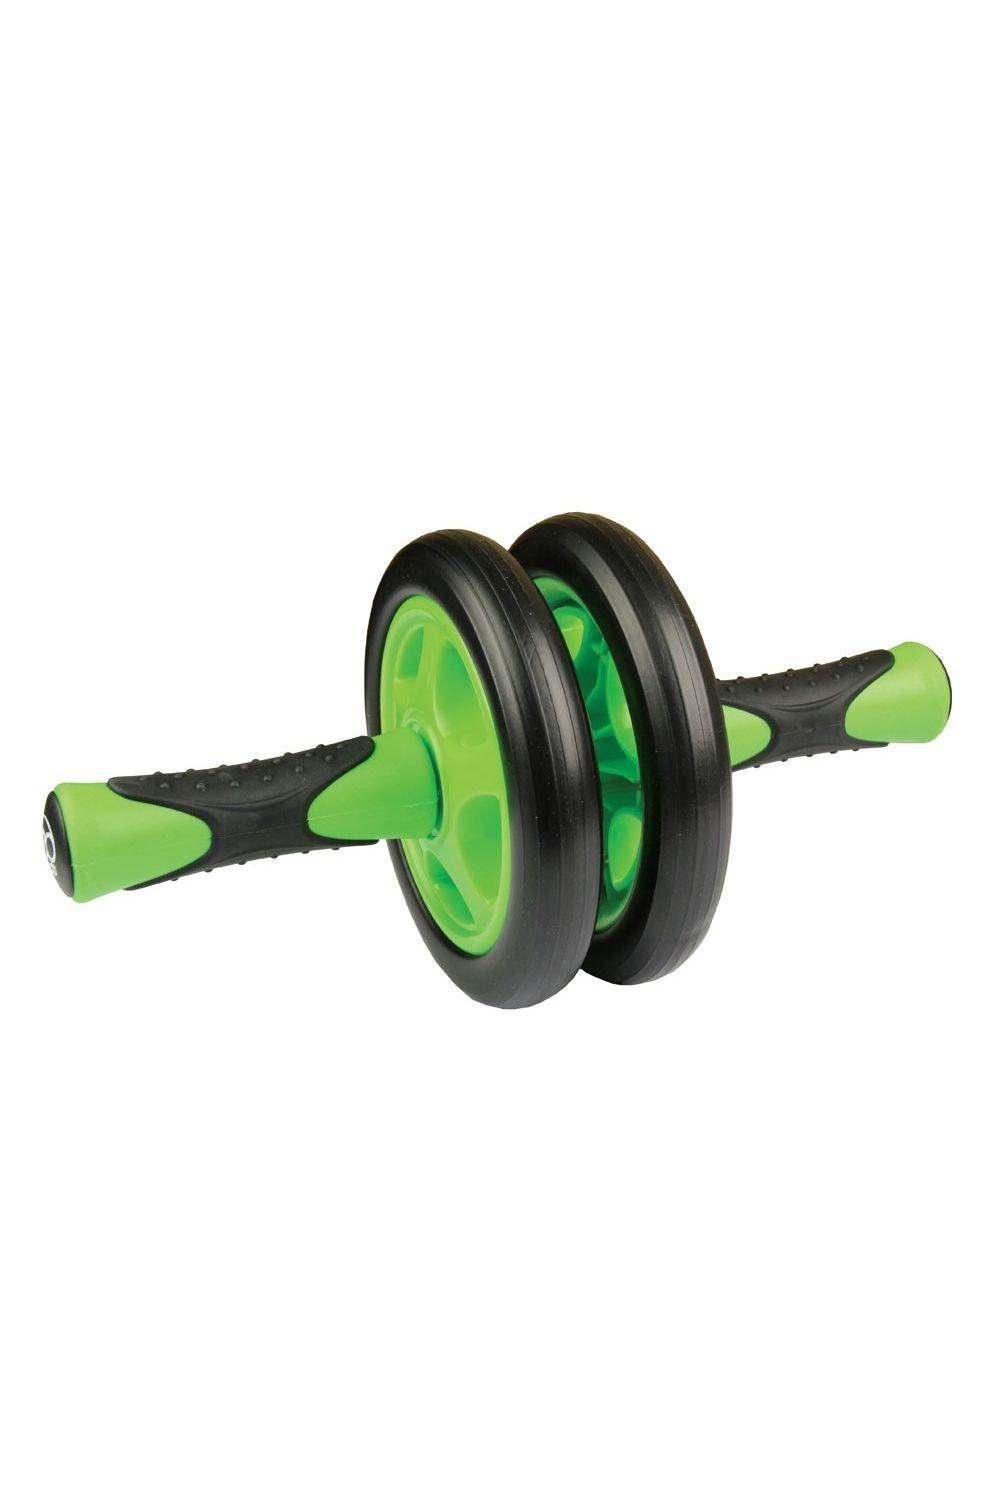 Fitness Mad Duo ab Wheel|green